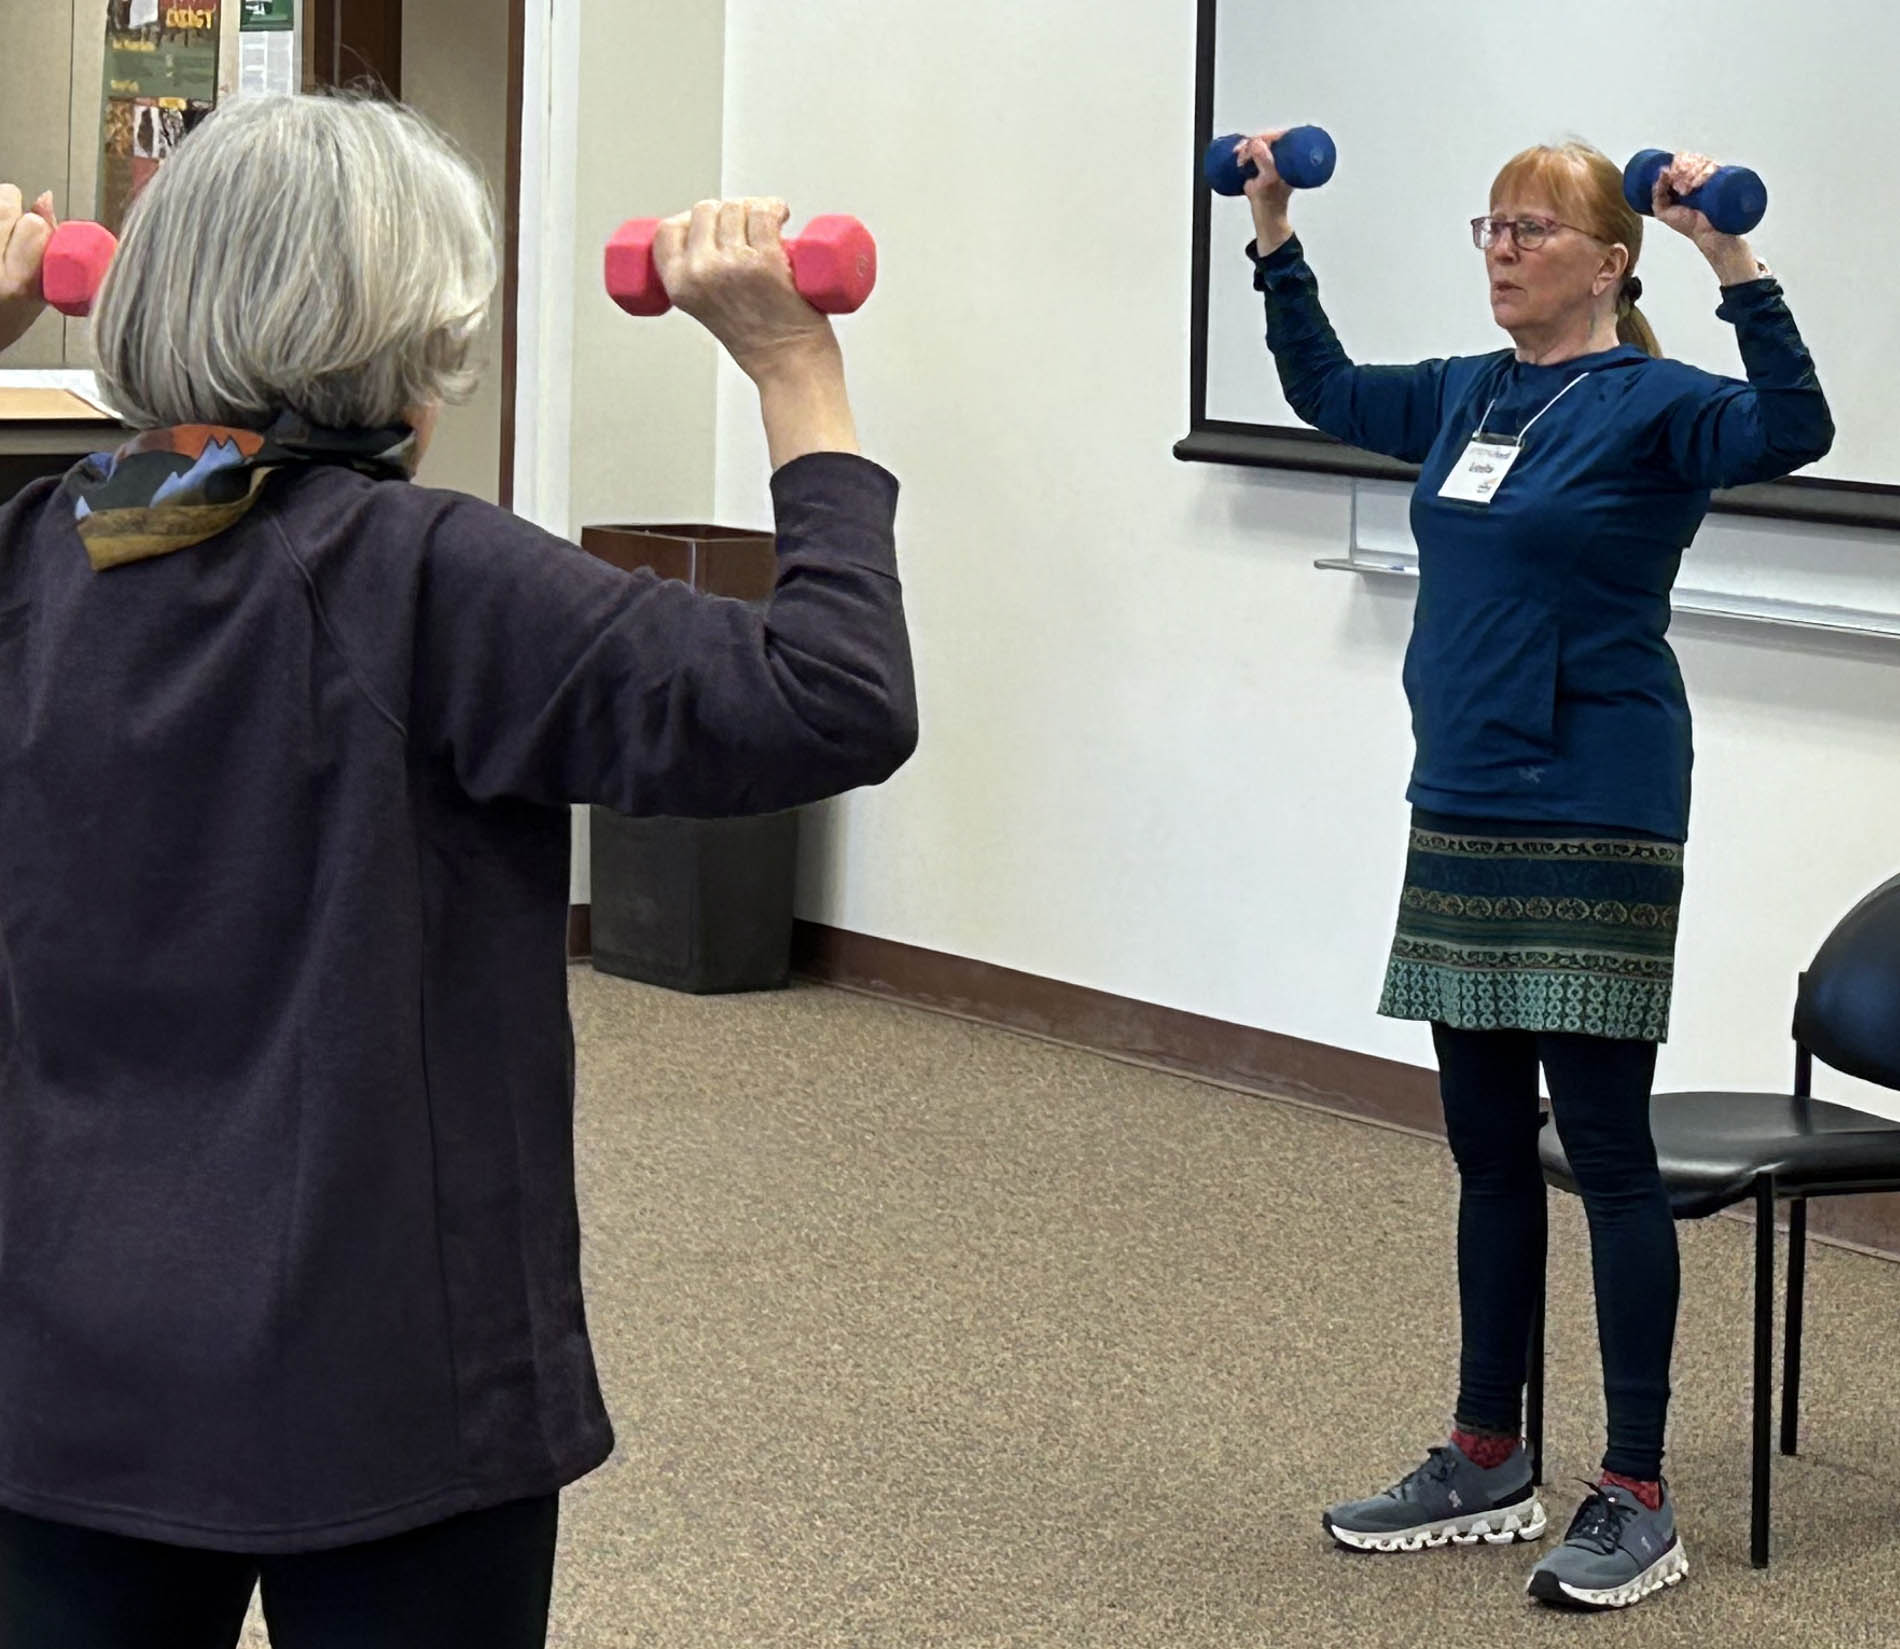 A woman at the front of a classroom lifts hand weights as she shows an older woman an exercise.